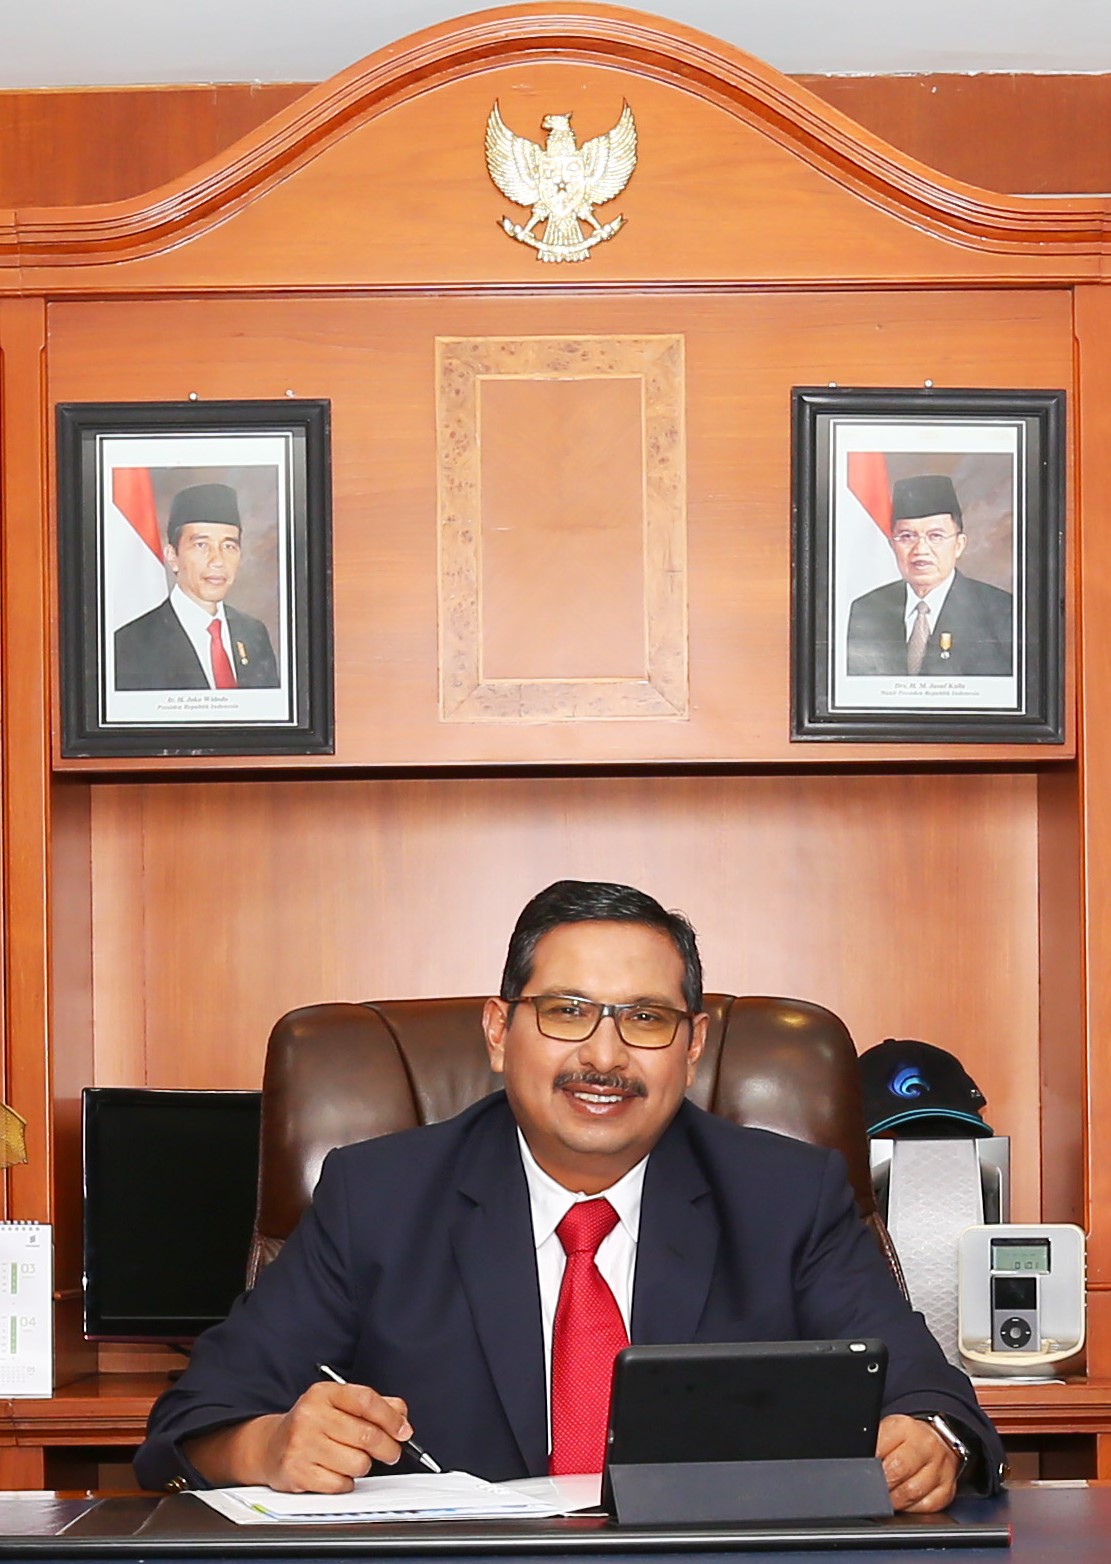 Dr. Ismail Ismail